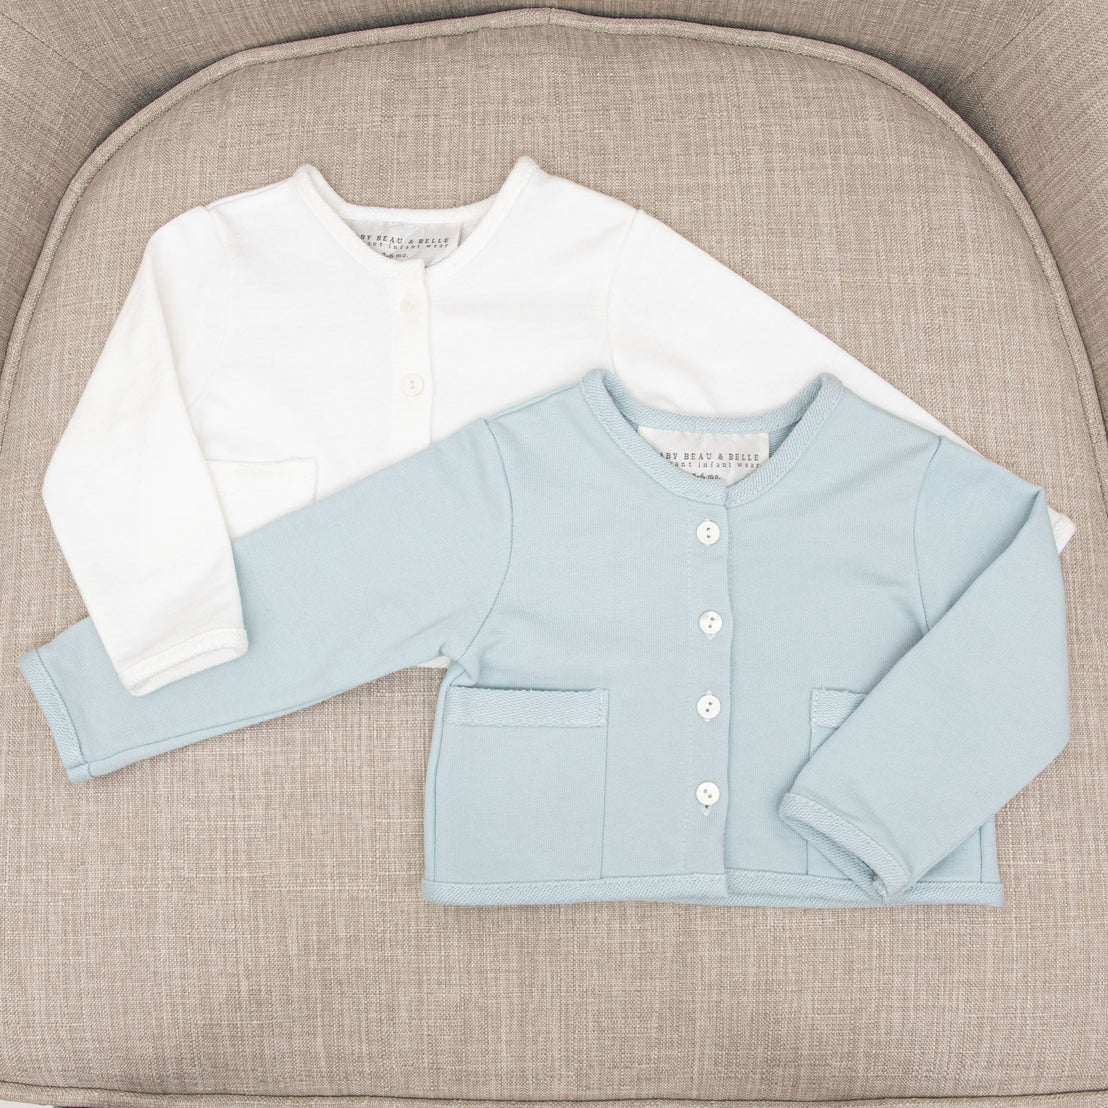 Two Isla French Terry Jackets, one white and one light blue, each featuring heirloom quality. They are displayed on a beige textured cushion. The blue jacket has buttons and a pocket detail.